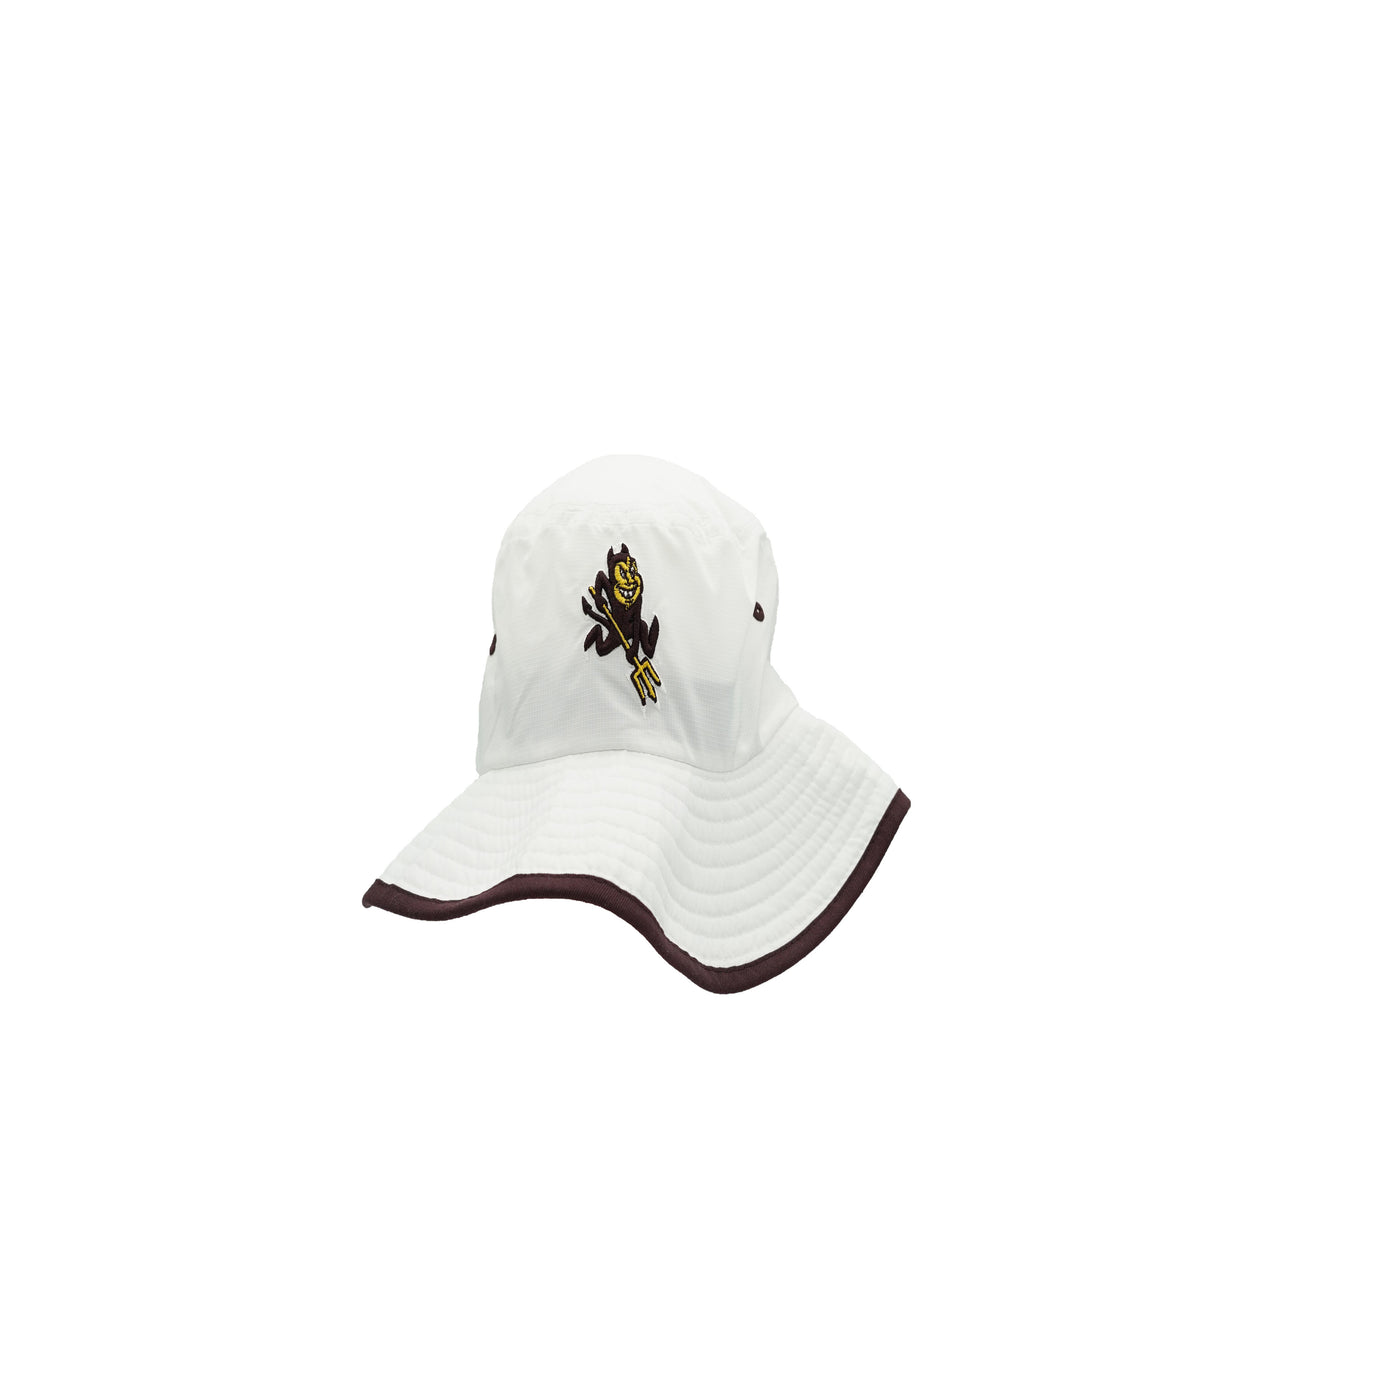 ASU white bucket hat with Sparky logo on the front. 